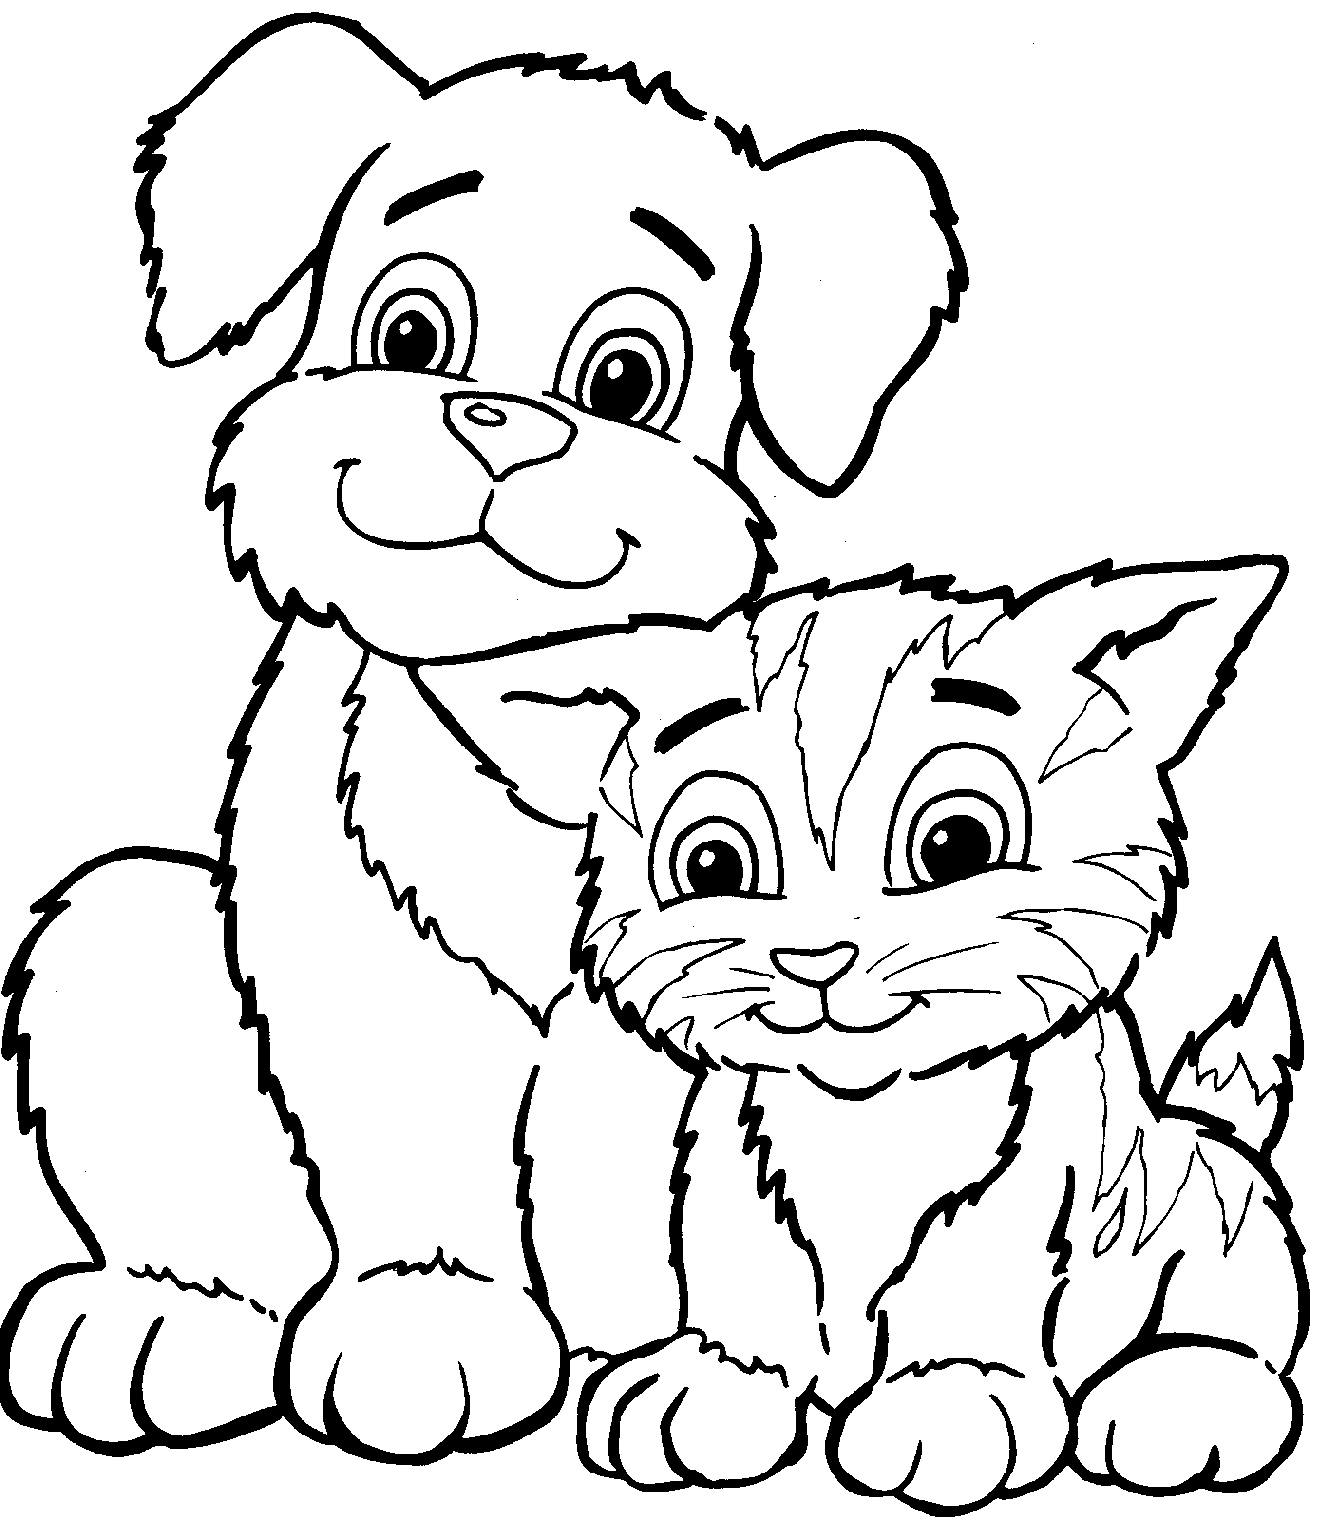 Children Biscuit The Dog Coloring Pages New On Ideas Free Coloring ...